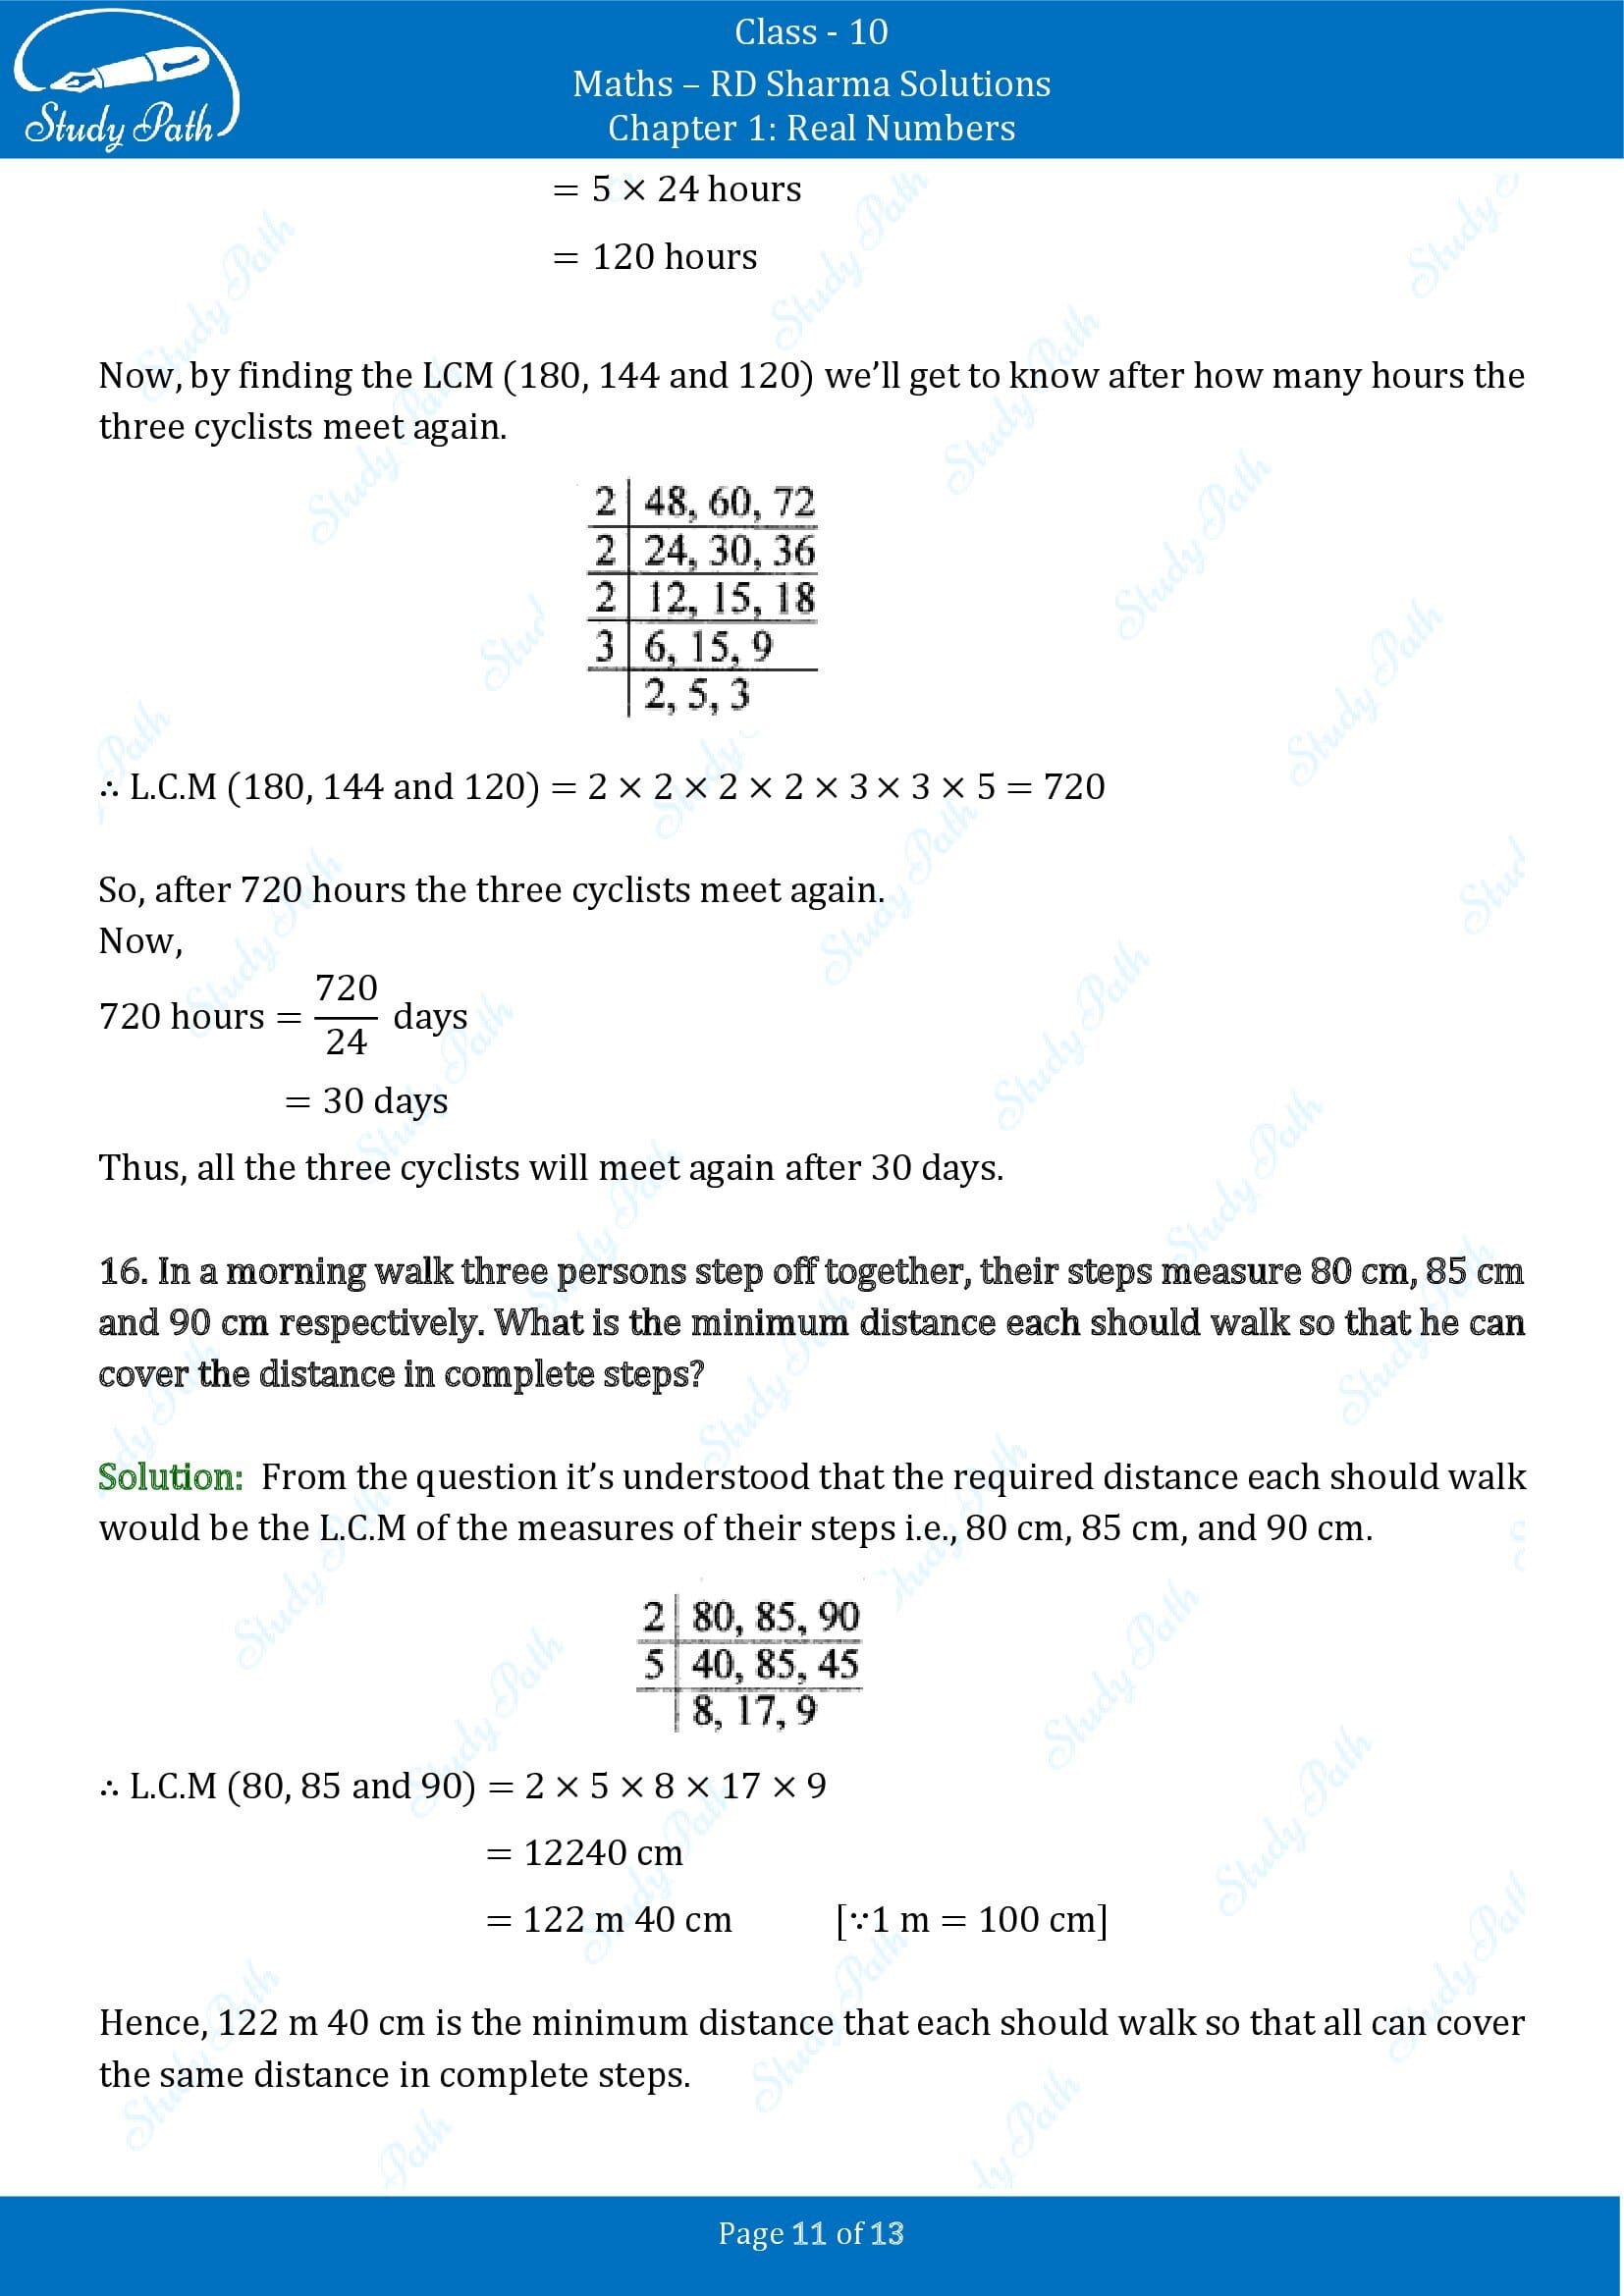 RD Sharma Solutions Class 10 Chapter 1 Real Numbers Exercise 1.4 00011